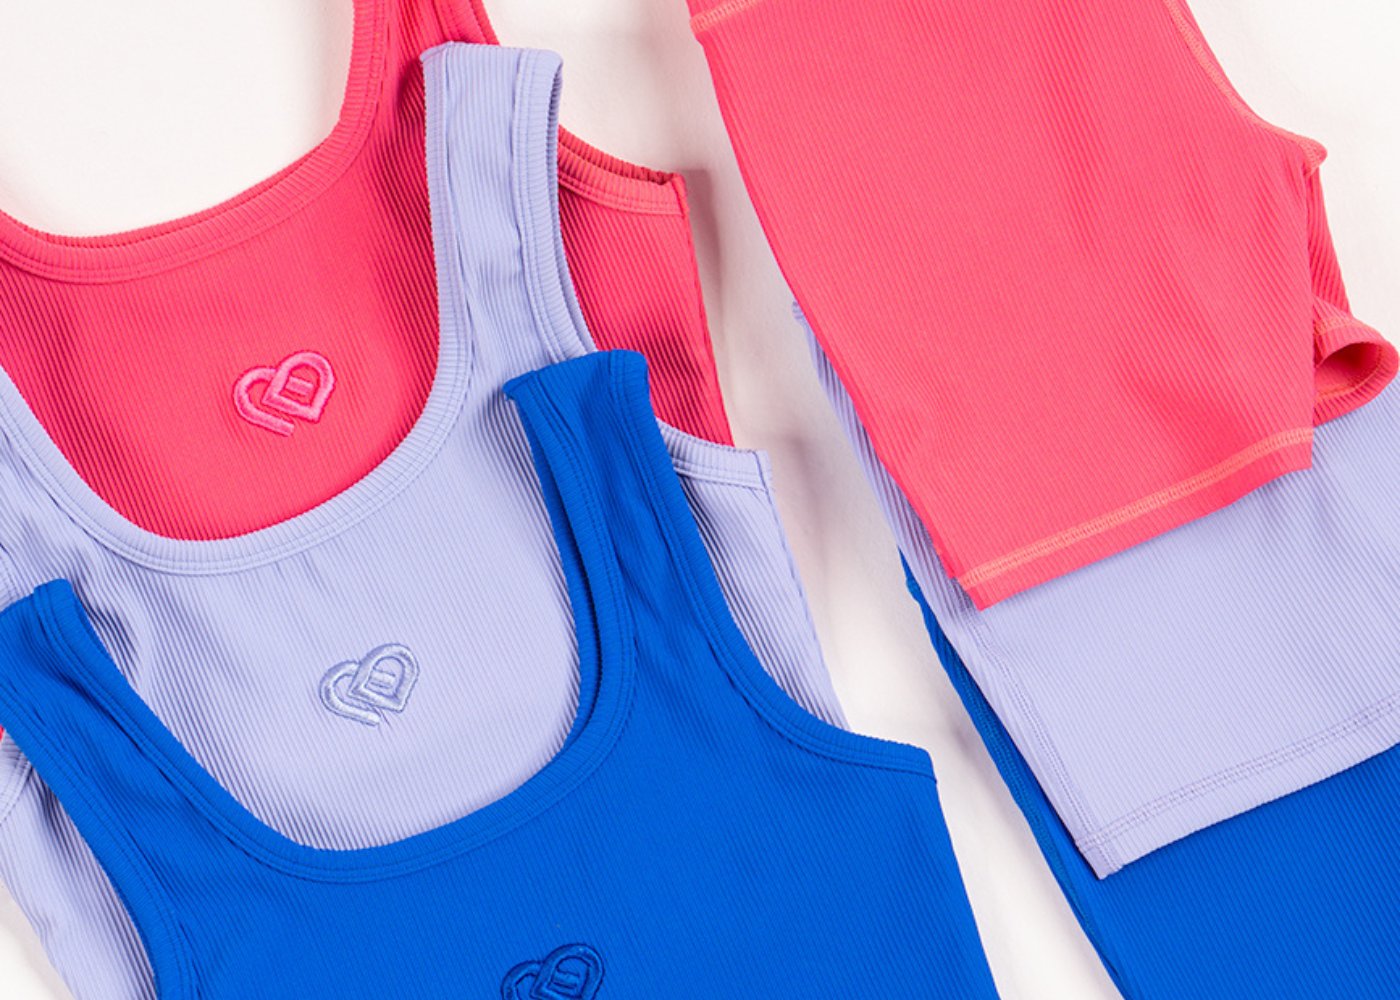 Activewear for girls and women.